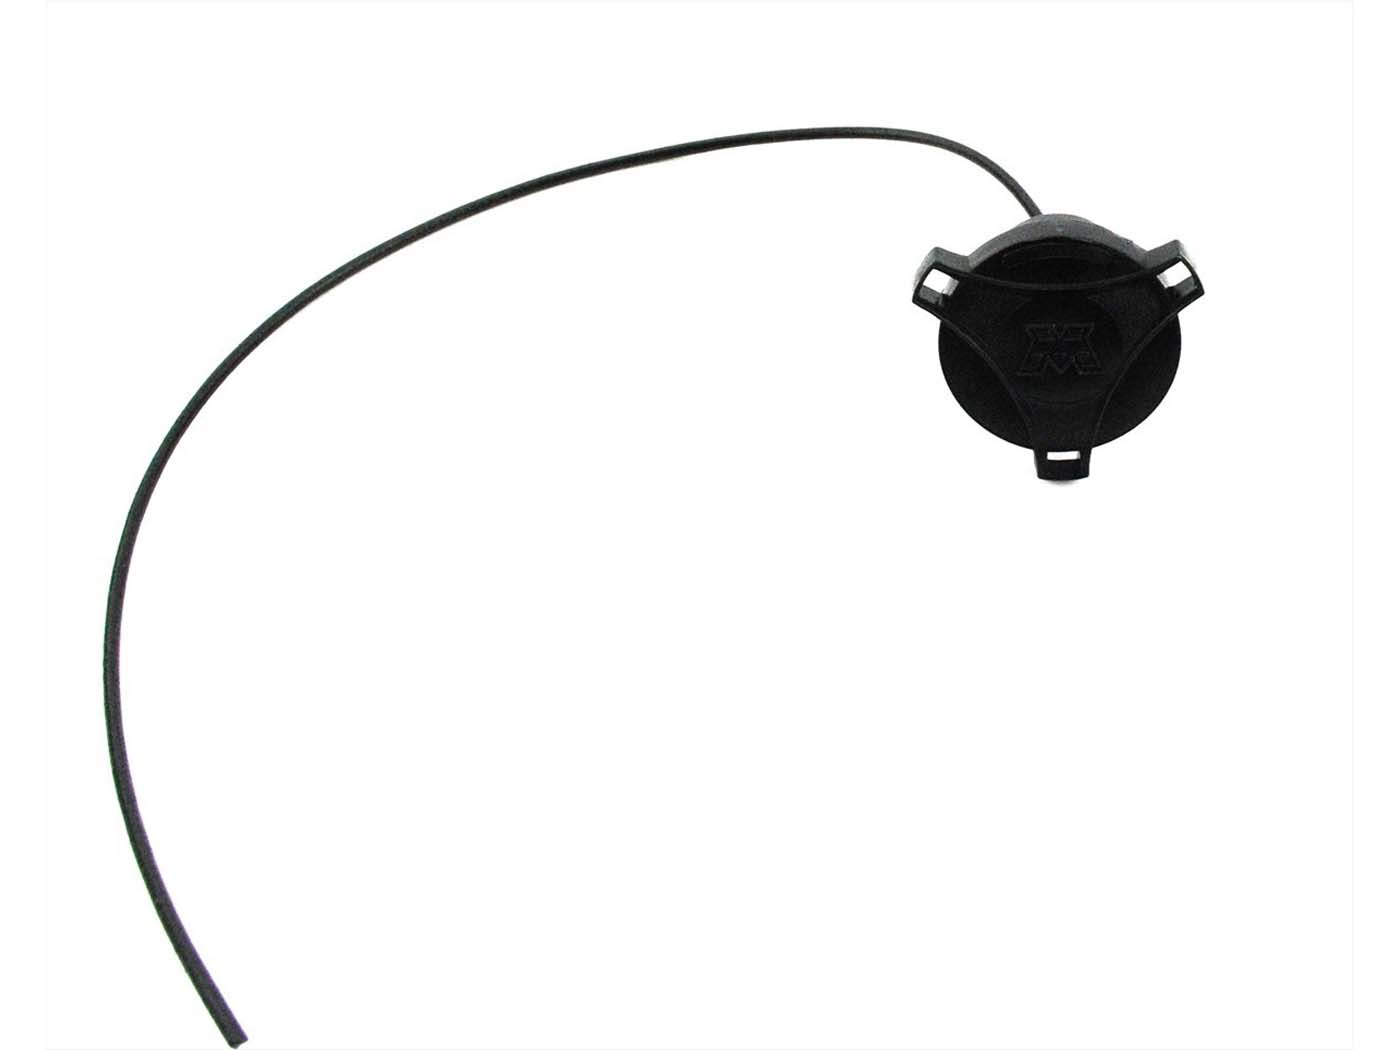 Fuel Filler Cap Indicator Cord Installation Diameter 30mm For Mobylette, Moped Moped